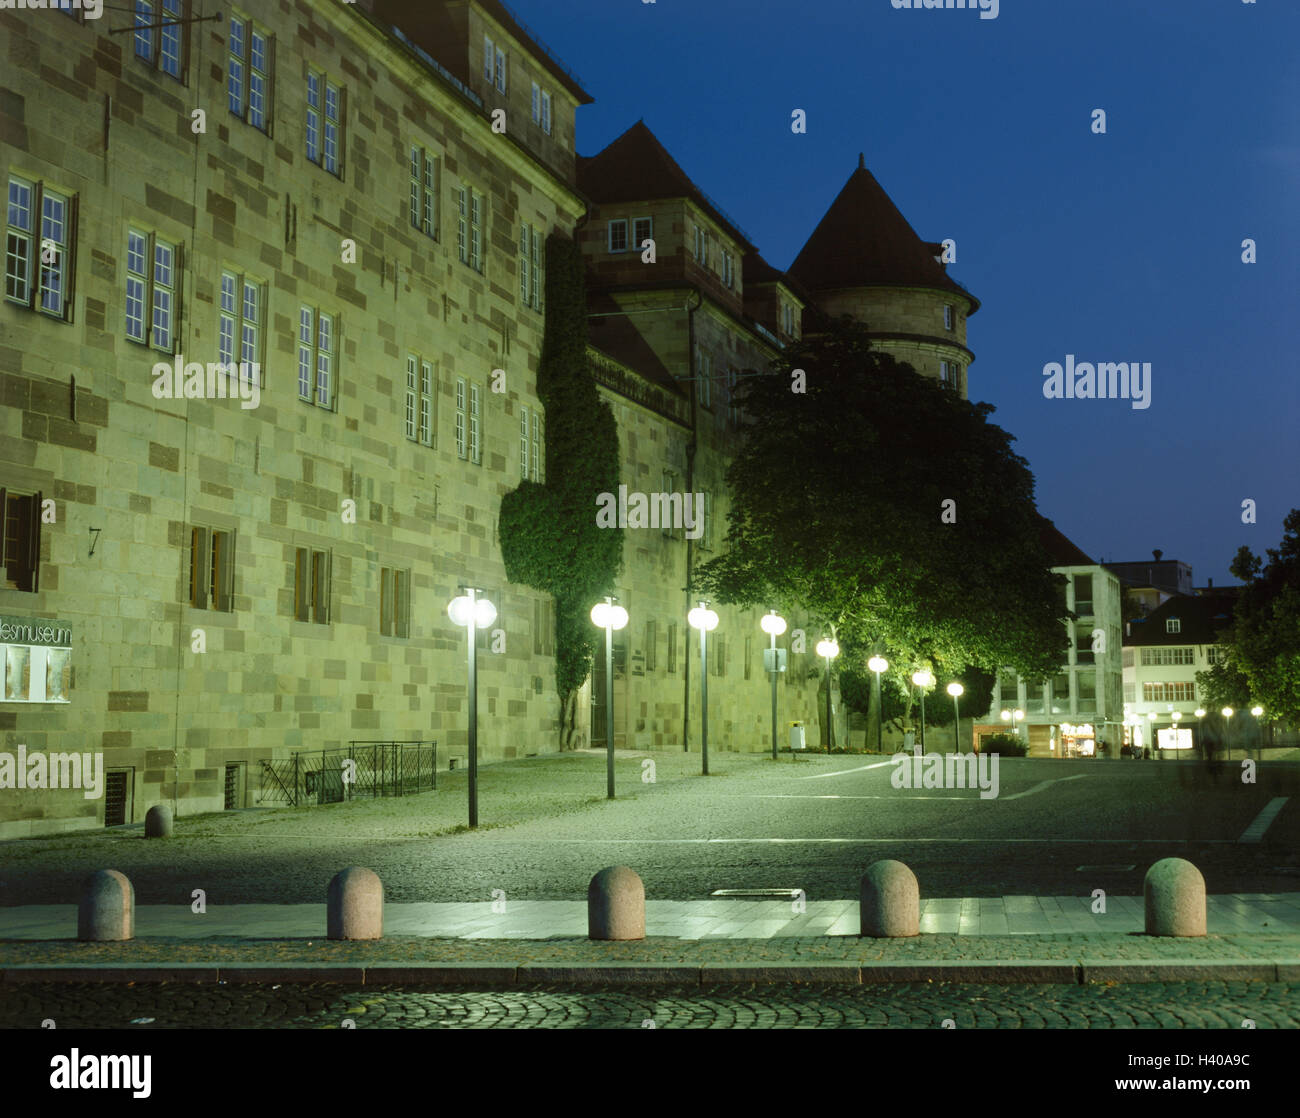 Germany, Baden-Wurttemberg, Stuttgart, old castle, street lamps, lighting, evening, Europe, town, state capital, place of interest, castle, builds 941, museum, Württembergisches land museum, lanterns, street lights Stock Photo